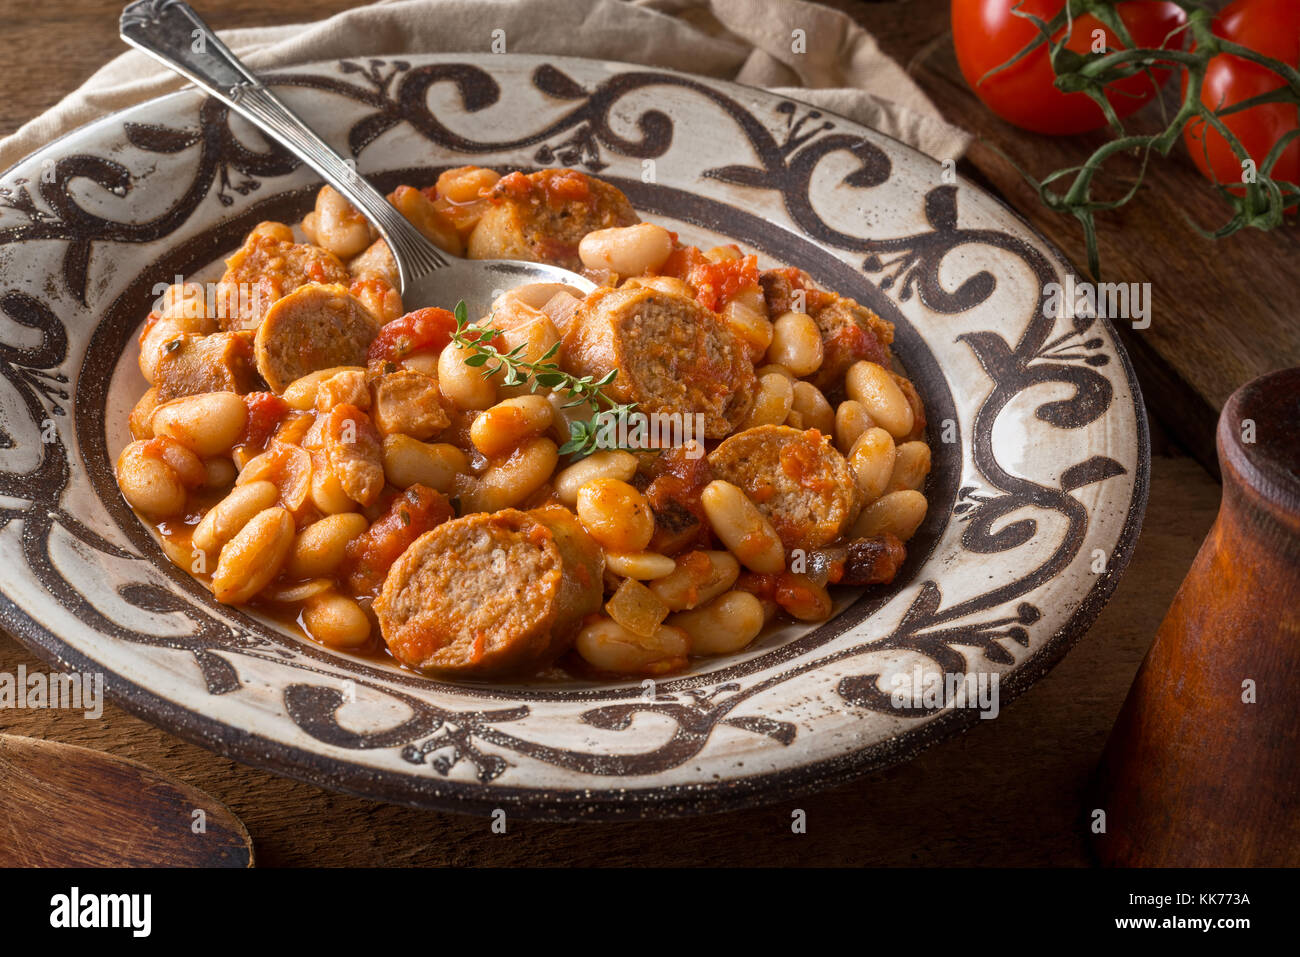 A delicious hearty cassoulet with artisanal sausage, tomato, bacon and white beans on a rustic tabletop. Stock Photo